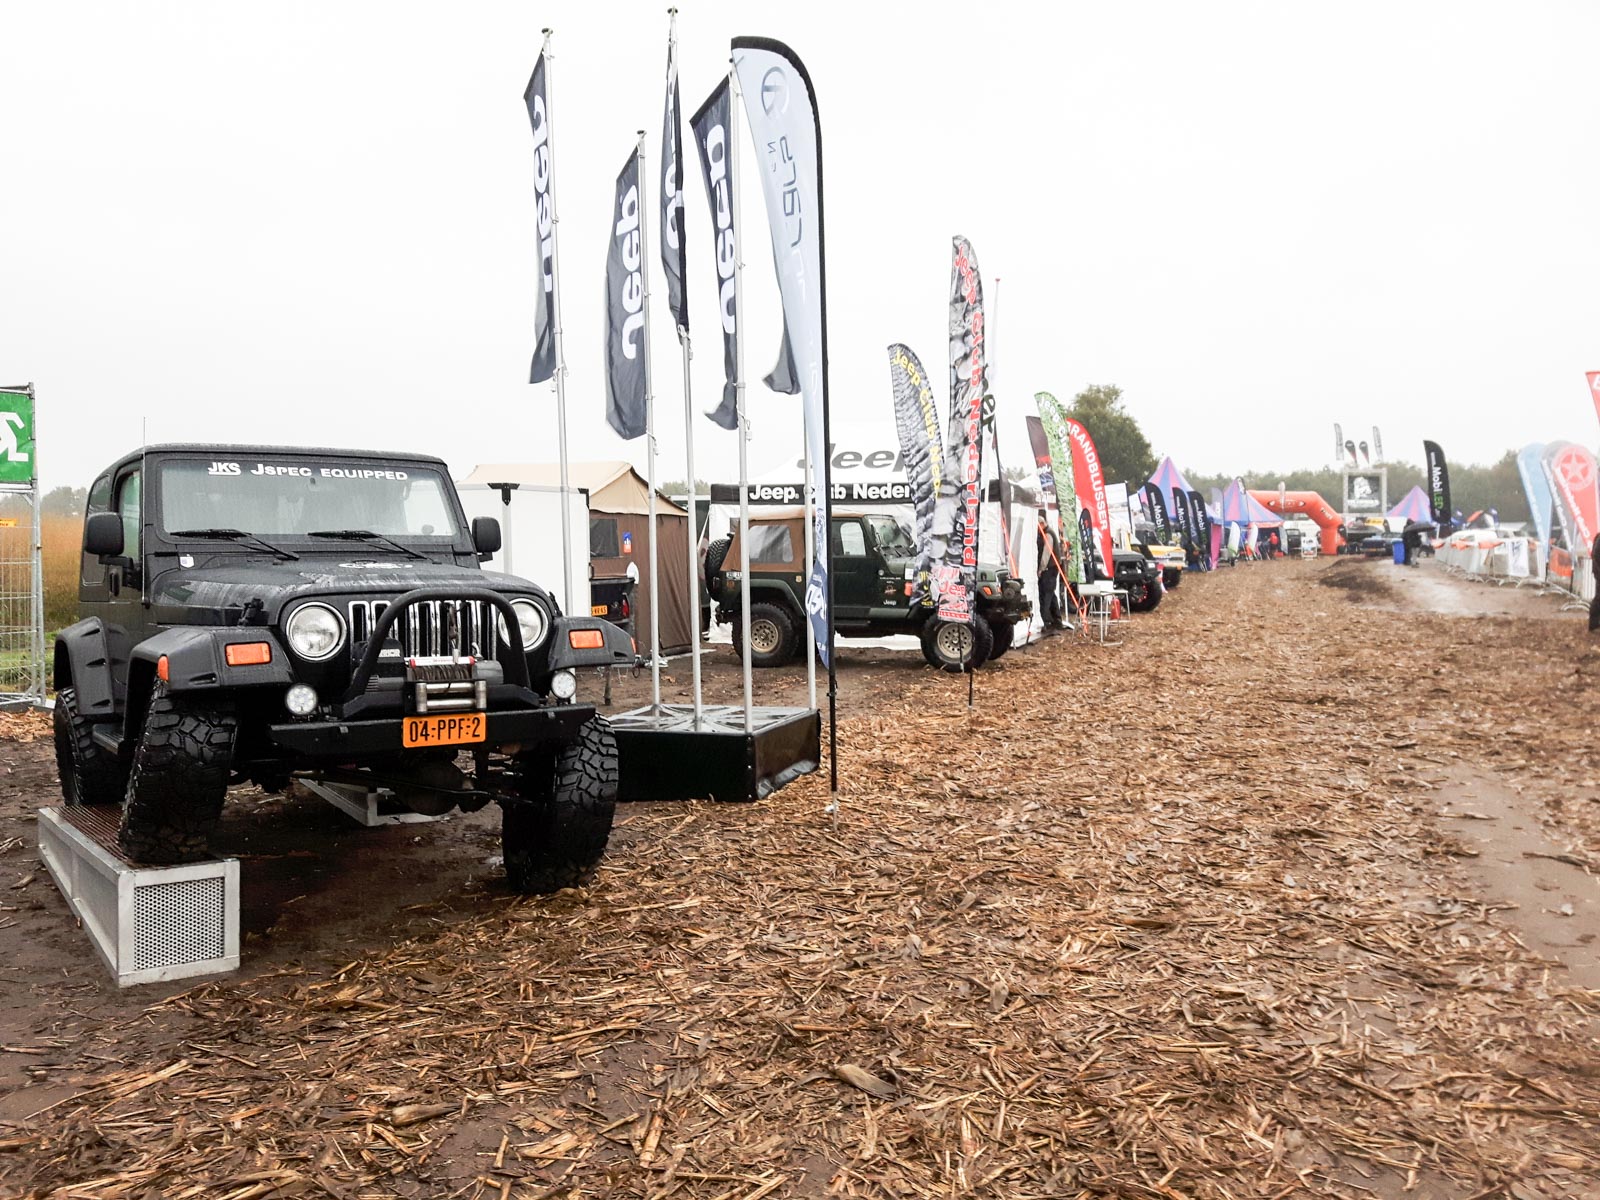 Offroad Budel 2017 - Messemeile.